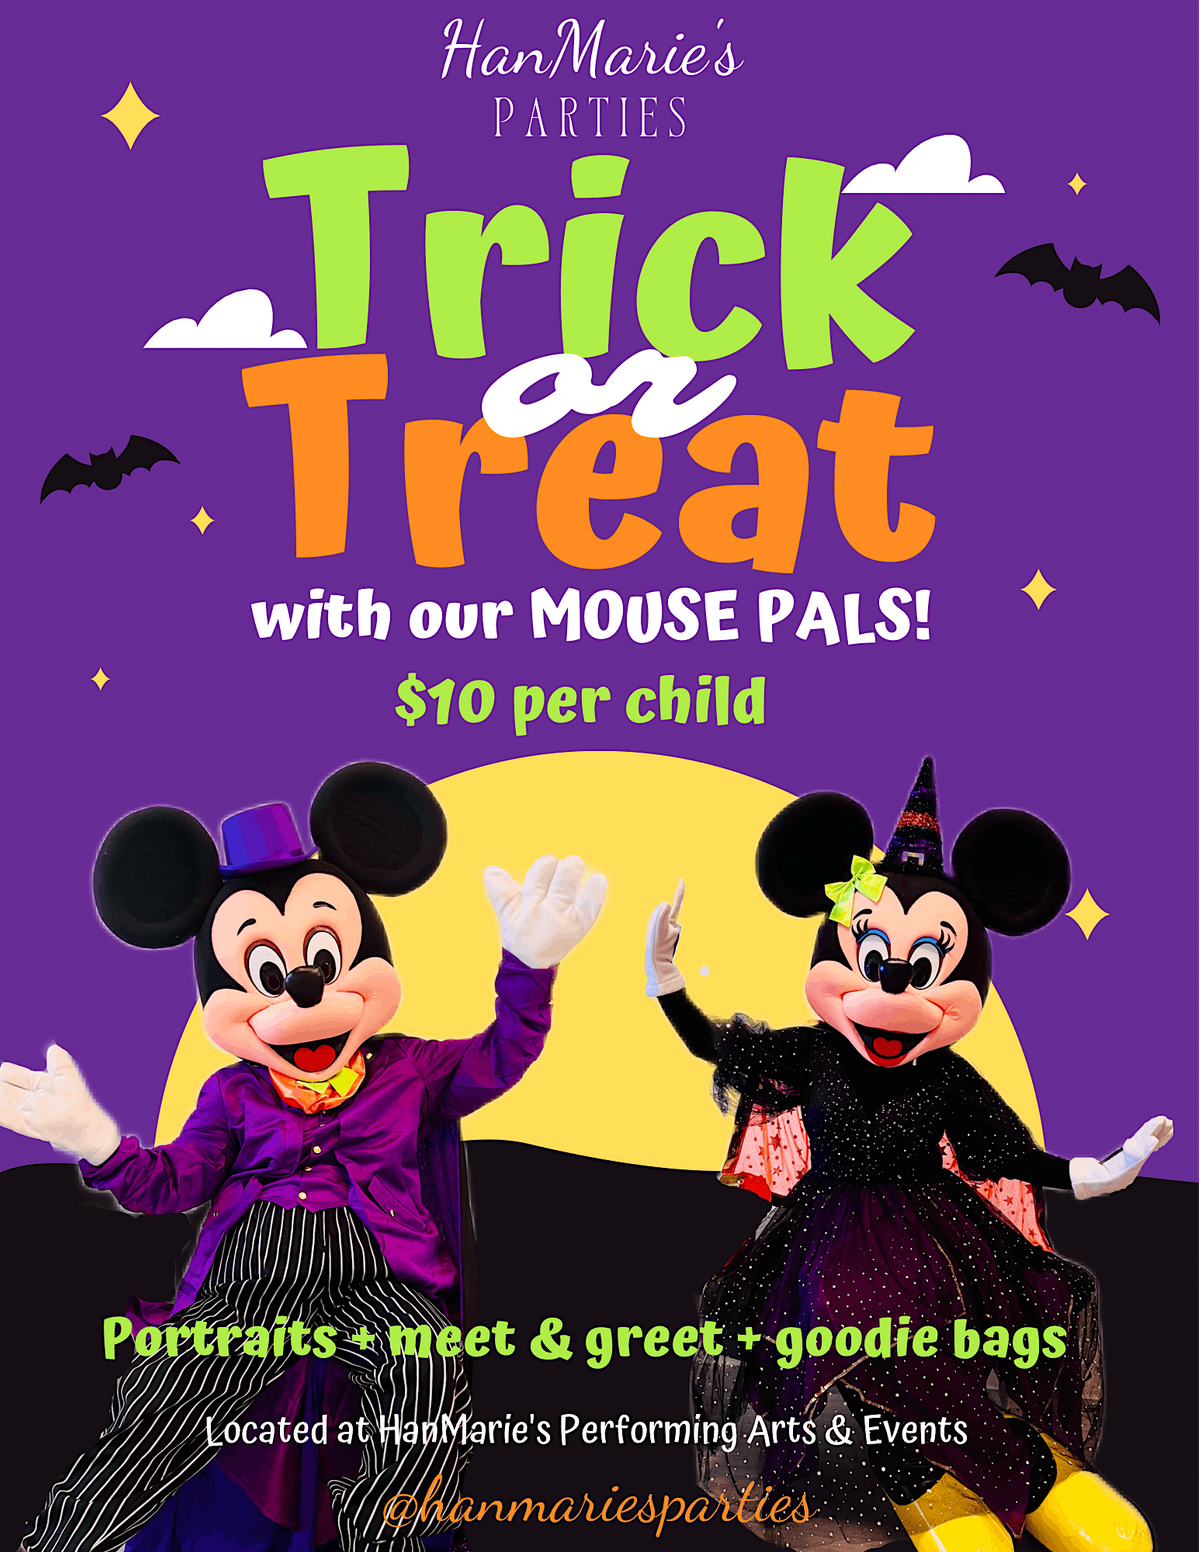 Trick or Treat with our MOUSE PALS! HanMarie's Performing Arts